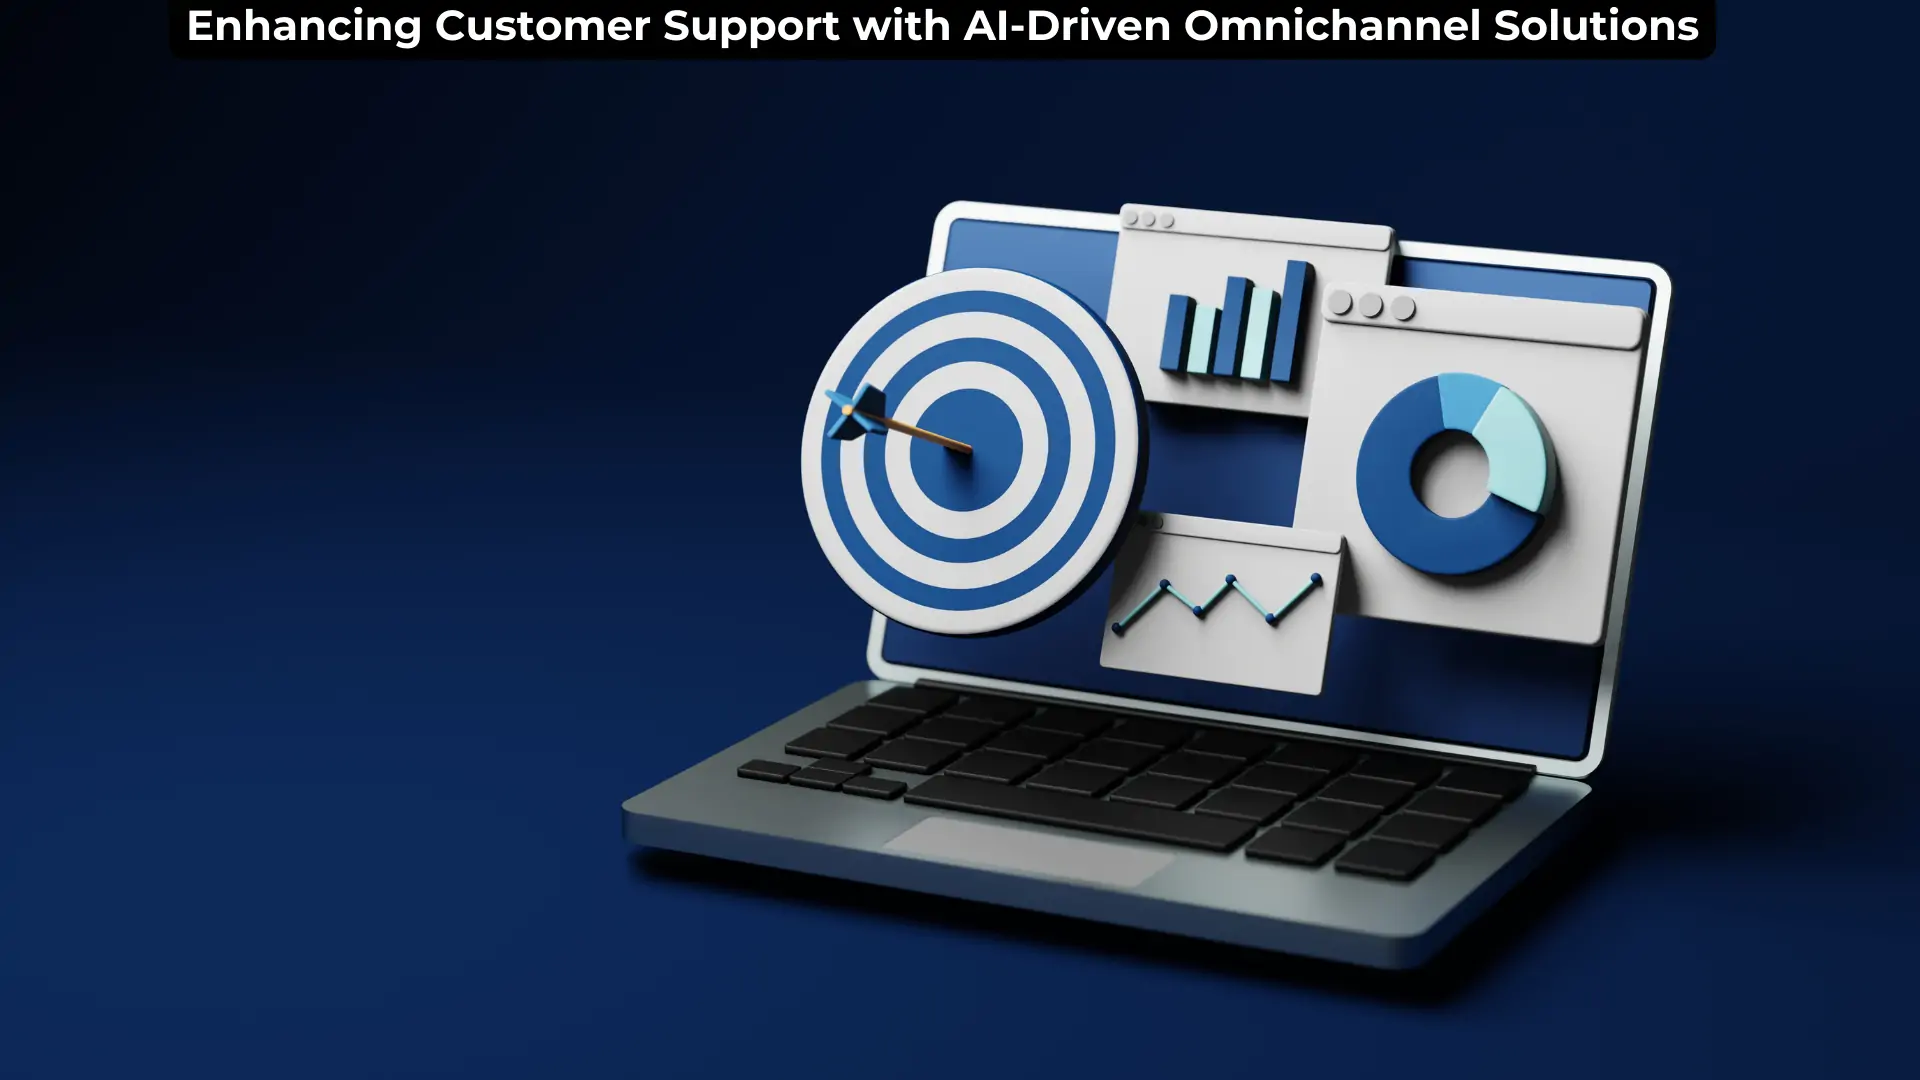 Enhancing Customer Support with AI-Driven Omnichannel Solutions